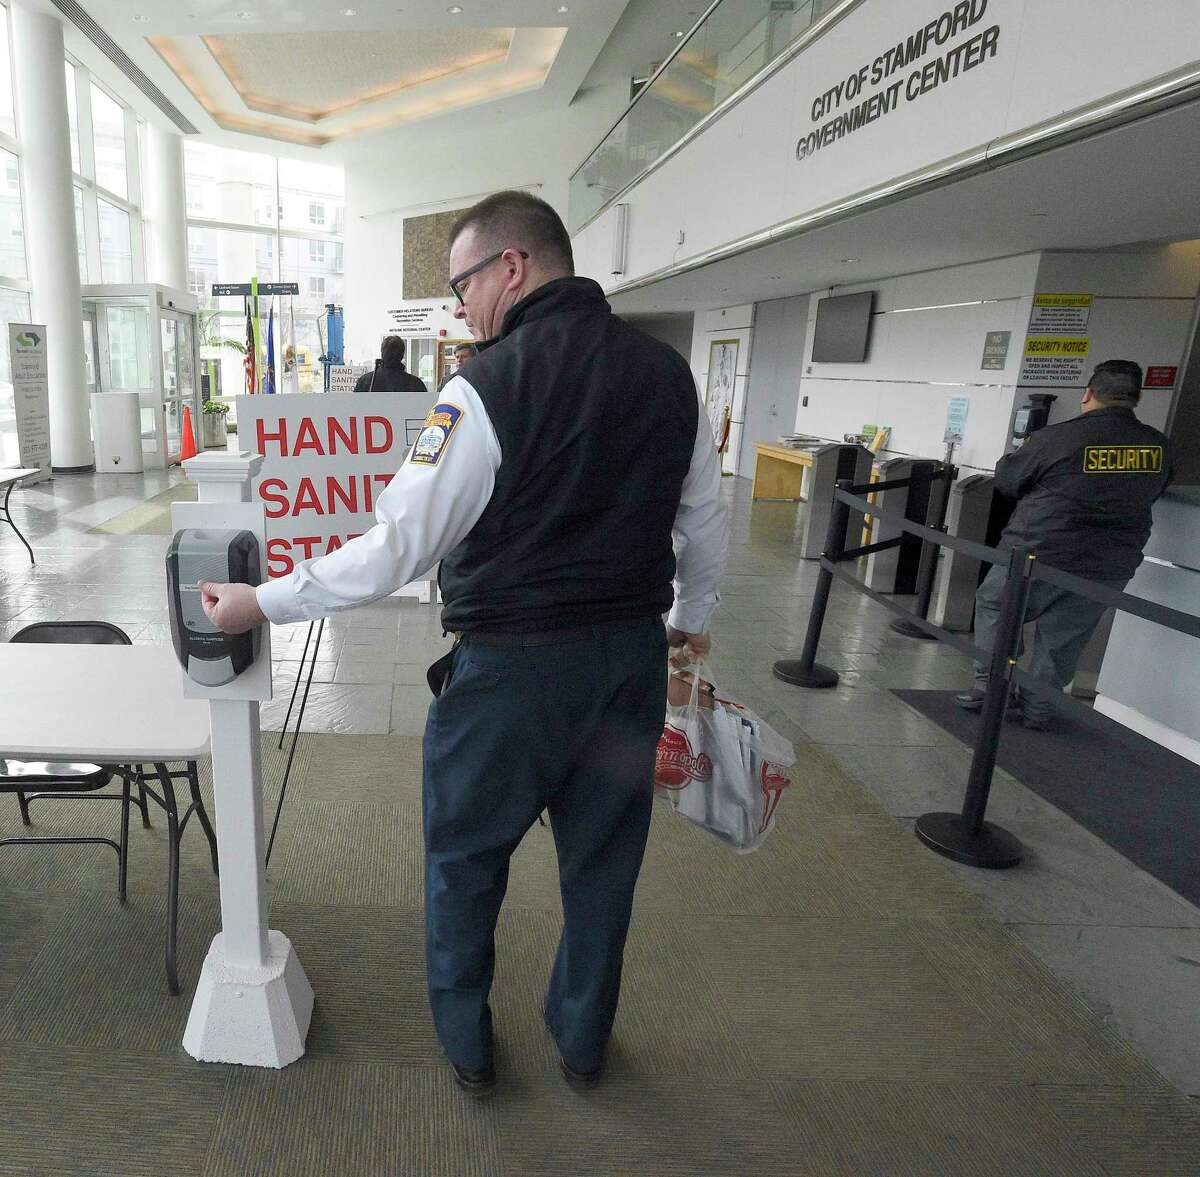 A city employee uses a hand sanitizer station as they enter the Stamford Government Center on Wednesday.